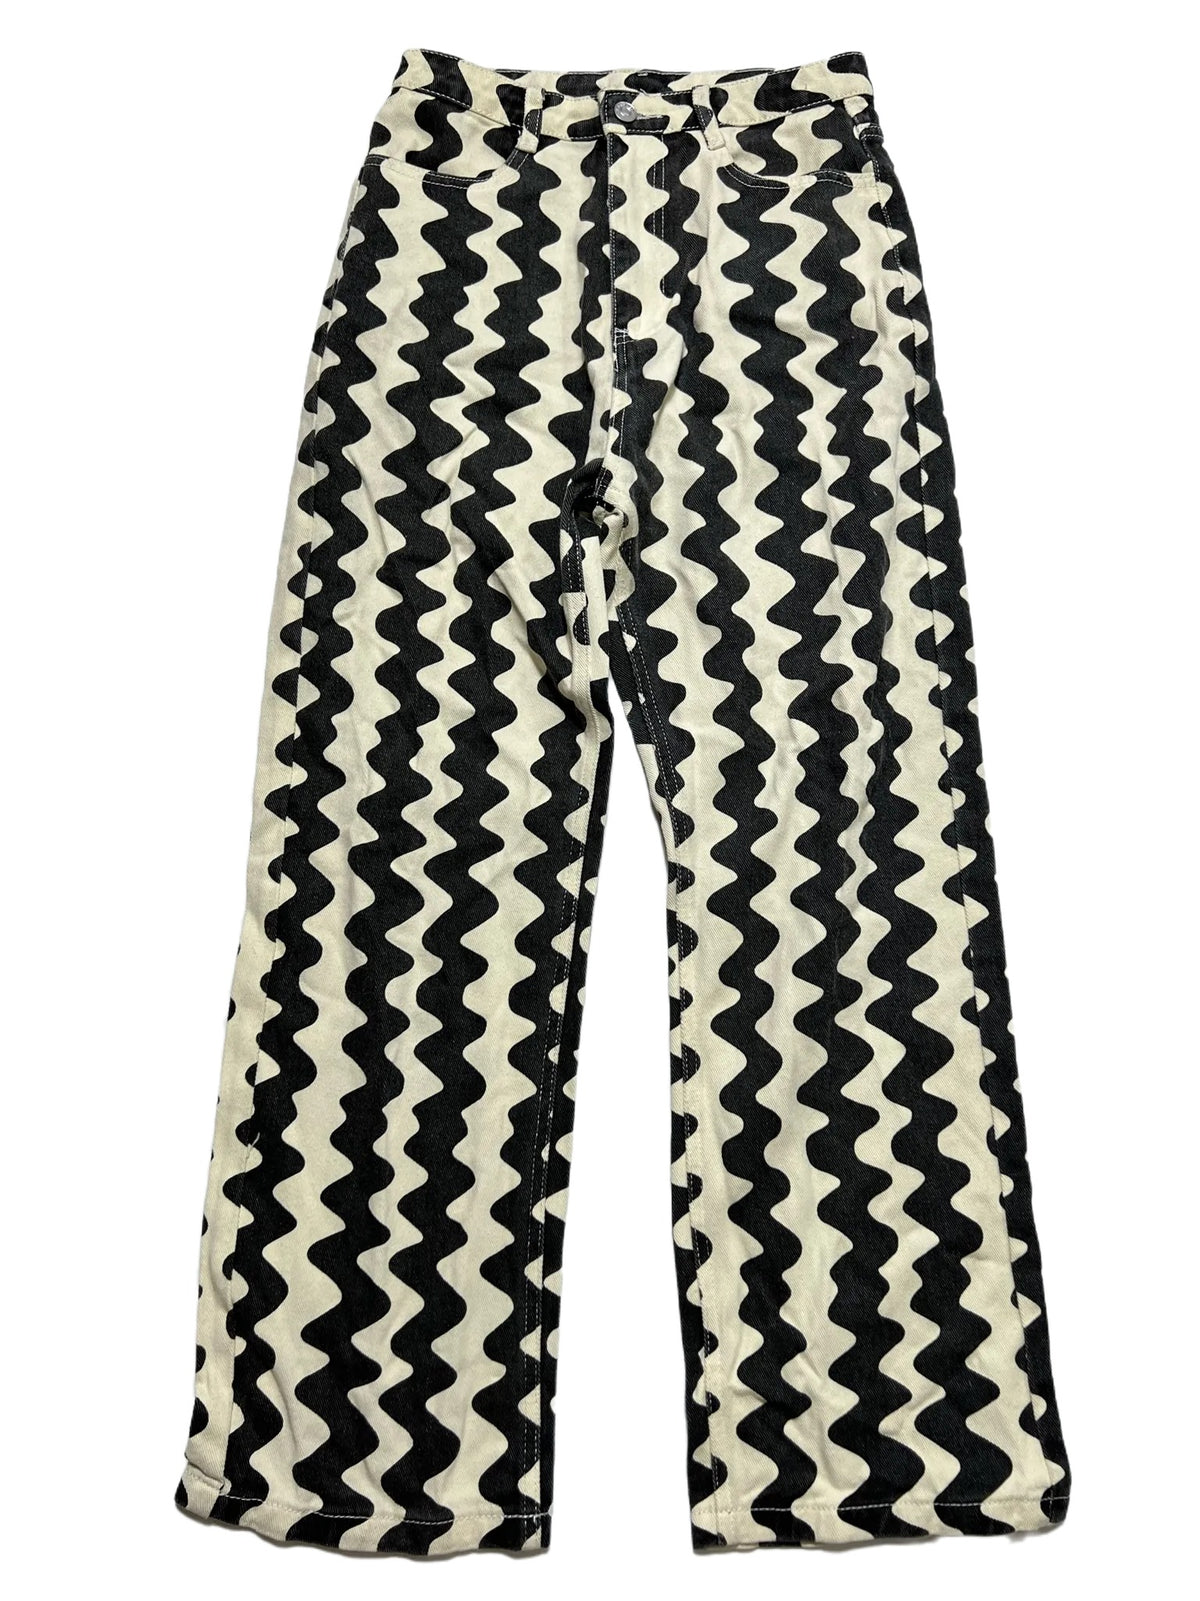 Cider- Black and White Swirl Jeans New With Tags!